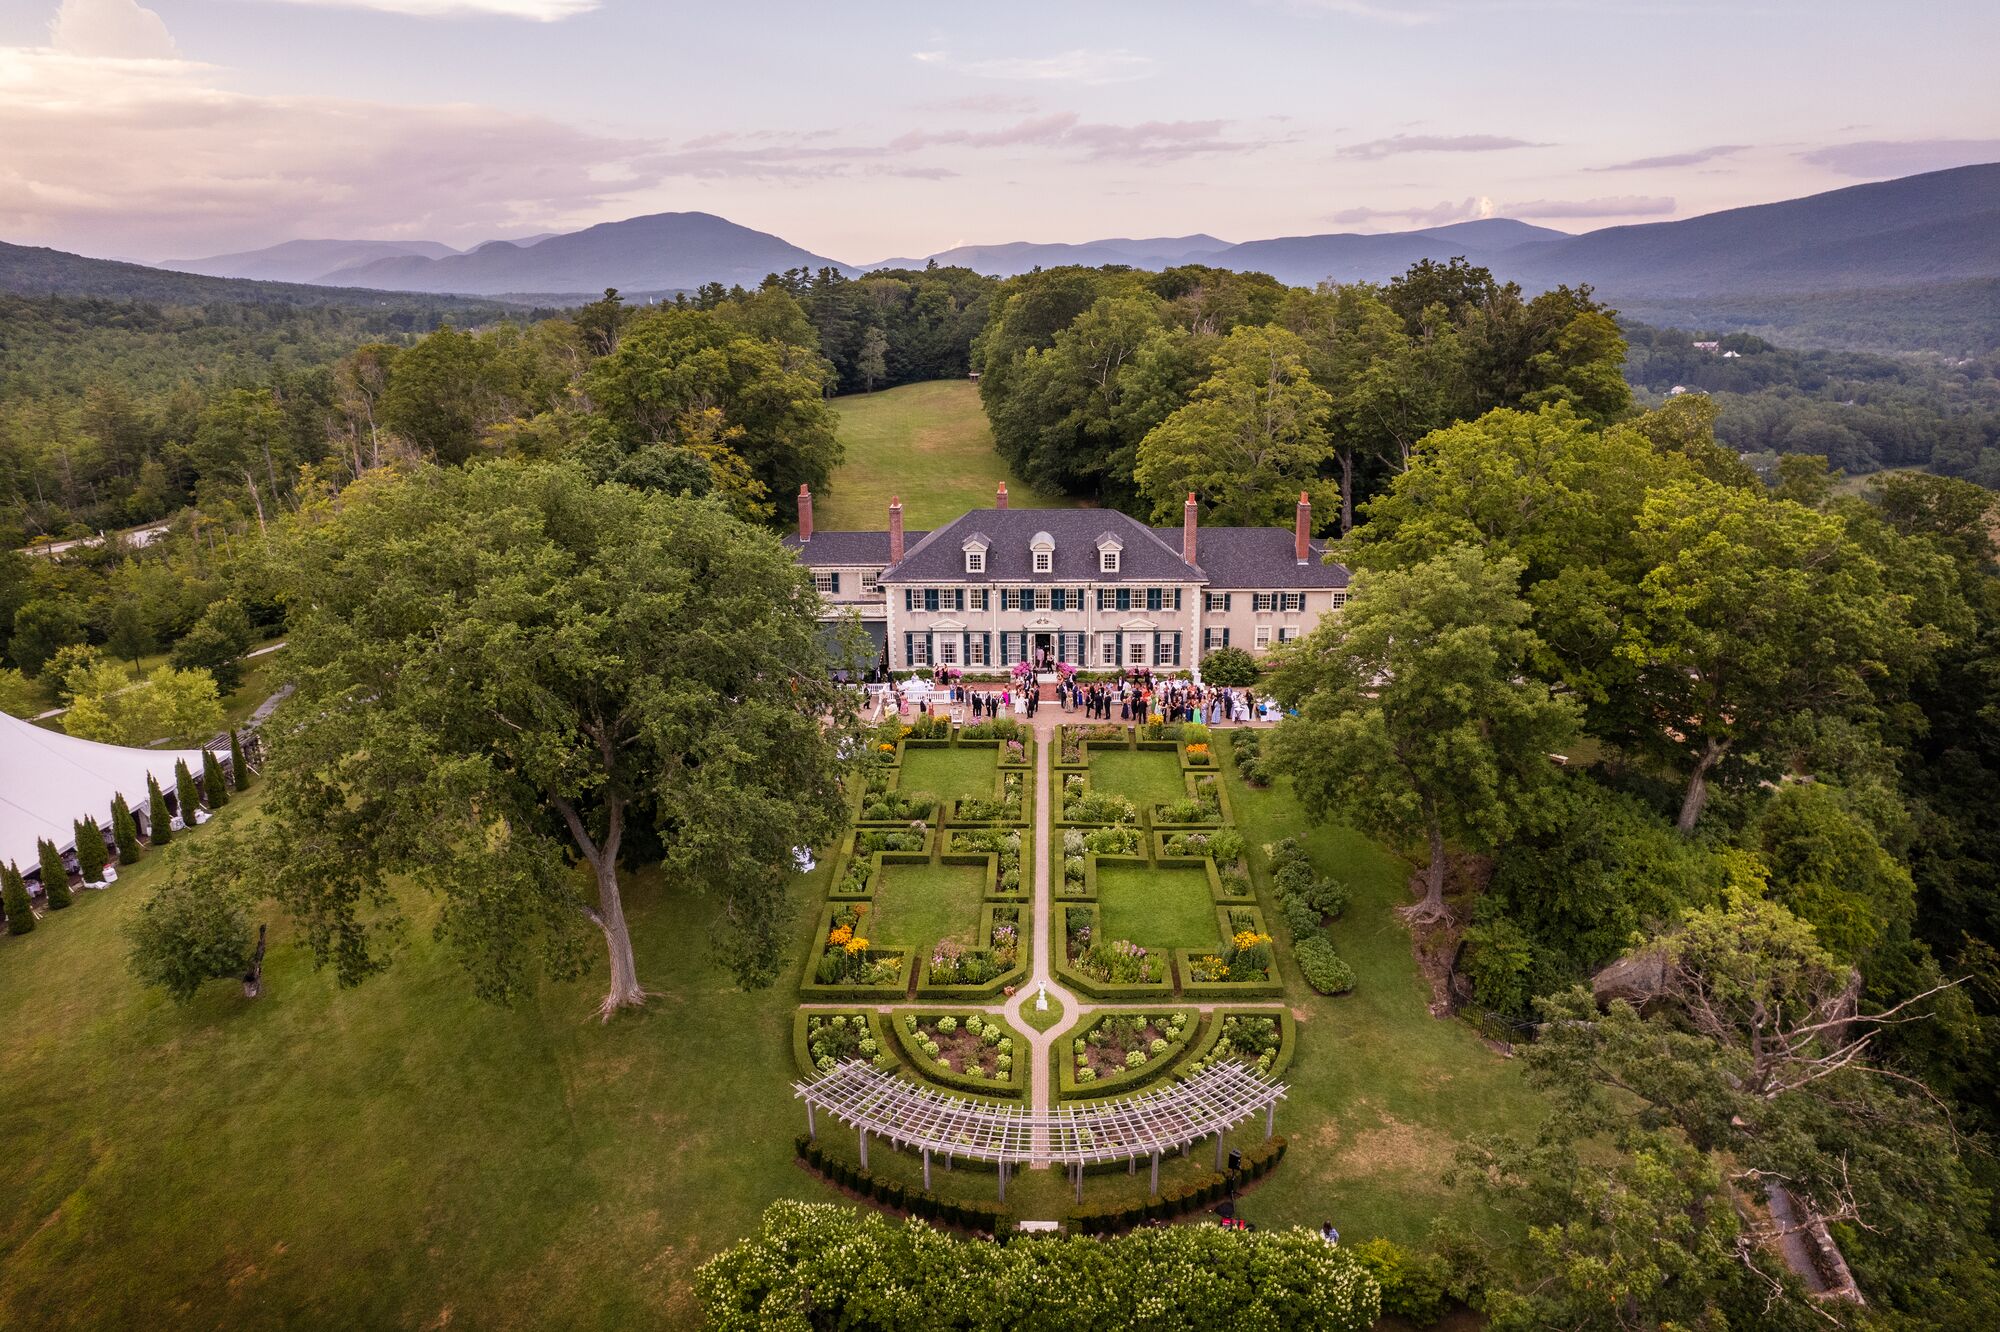 A historic mansion seen from above in the summer, nestled between mountains.